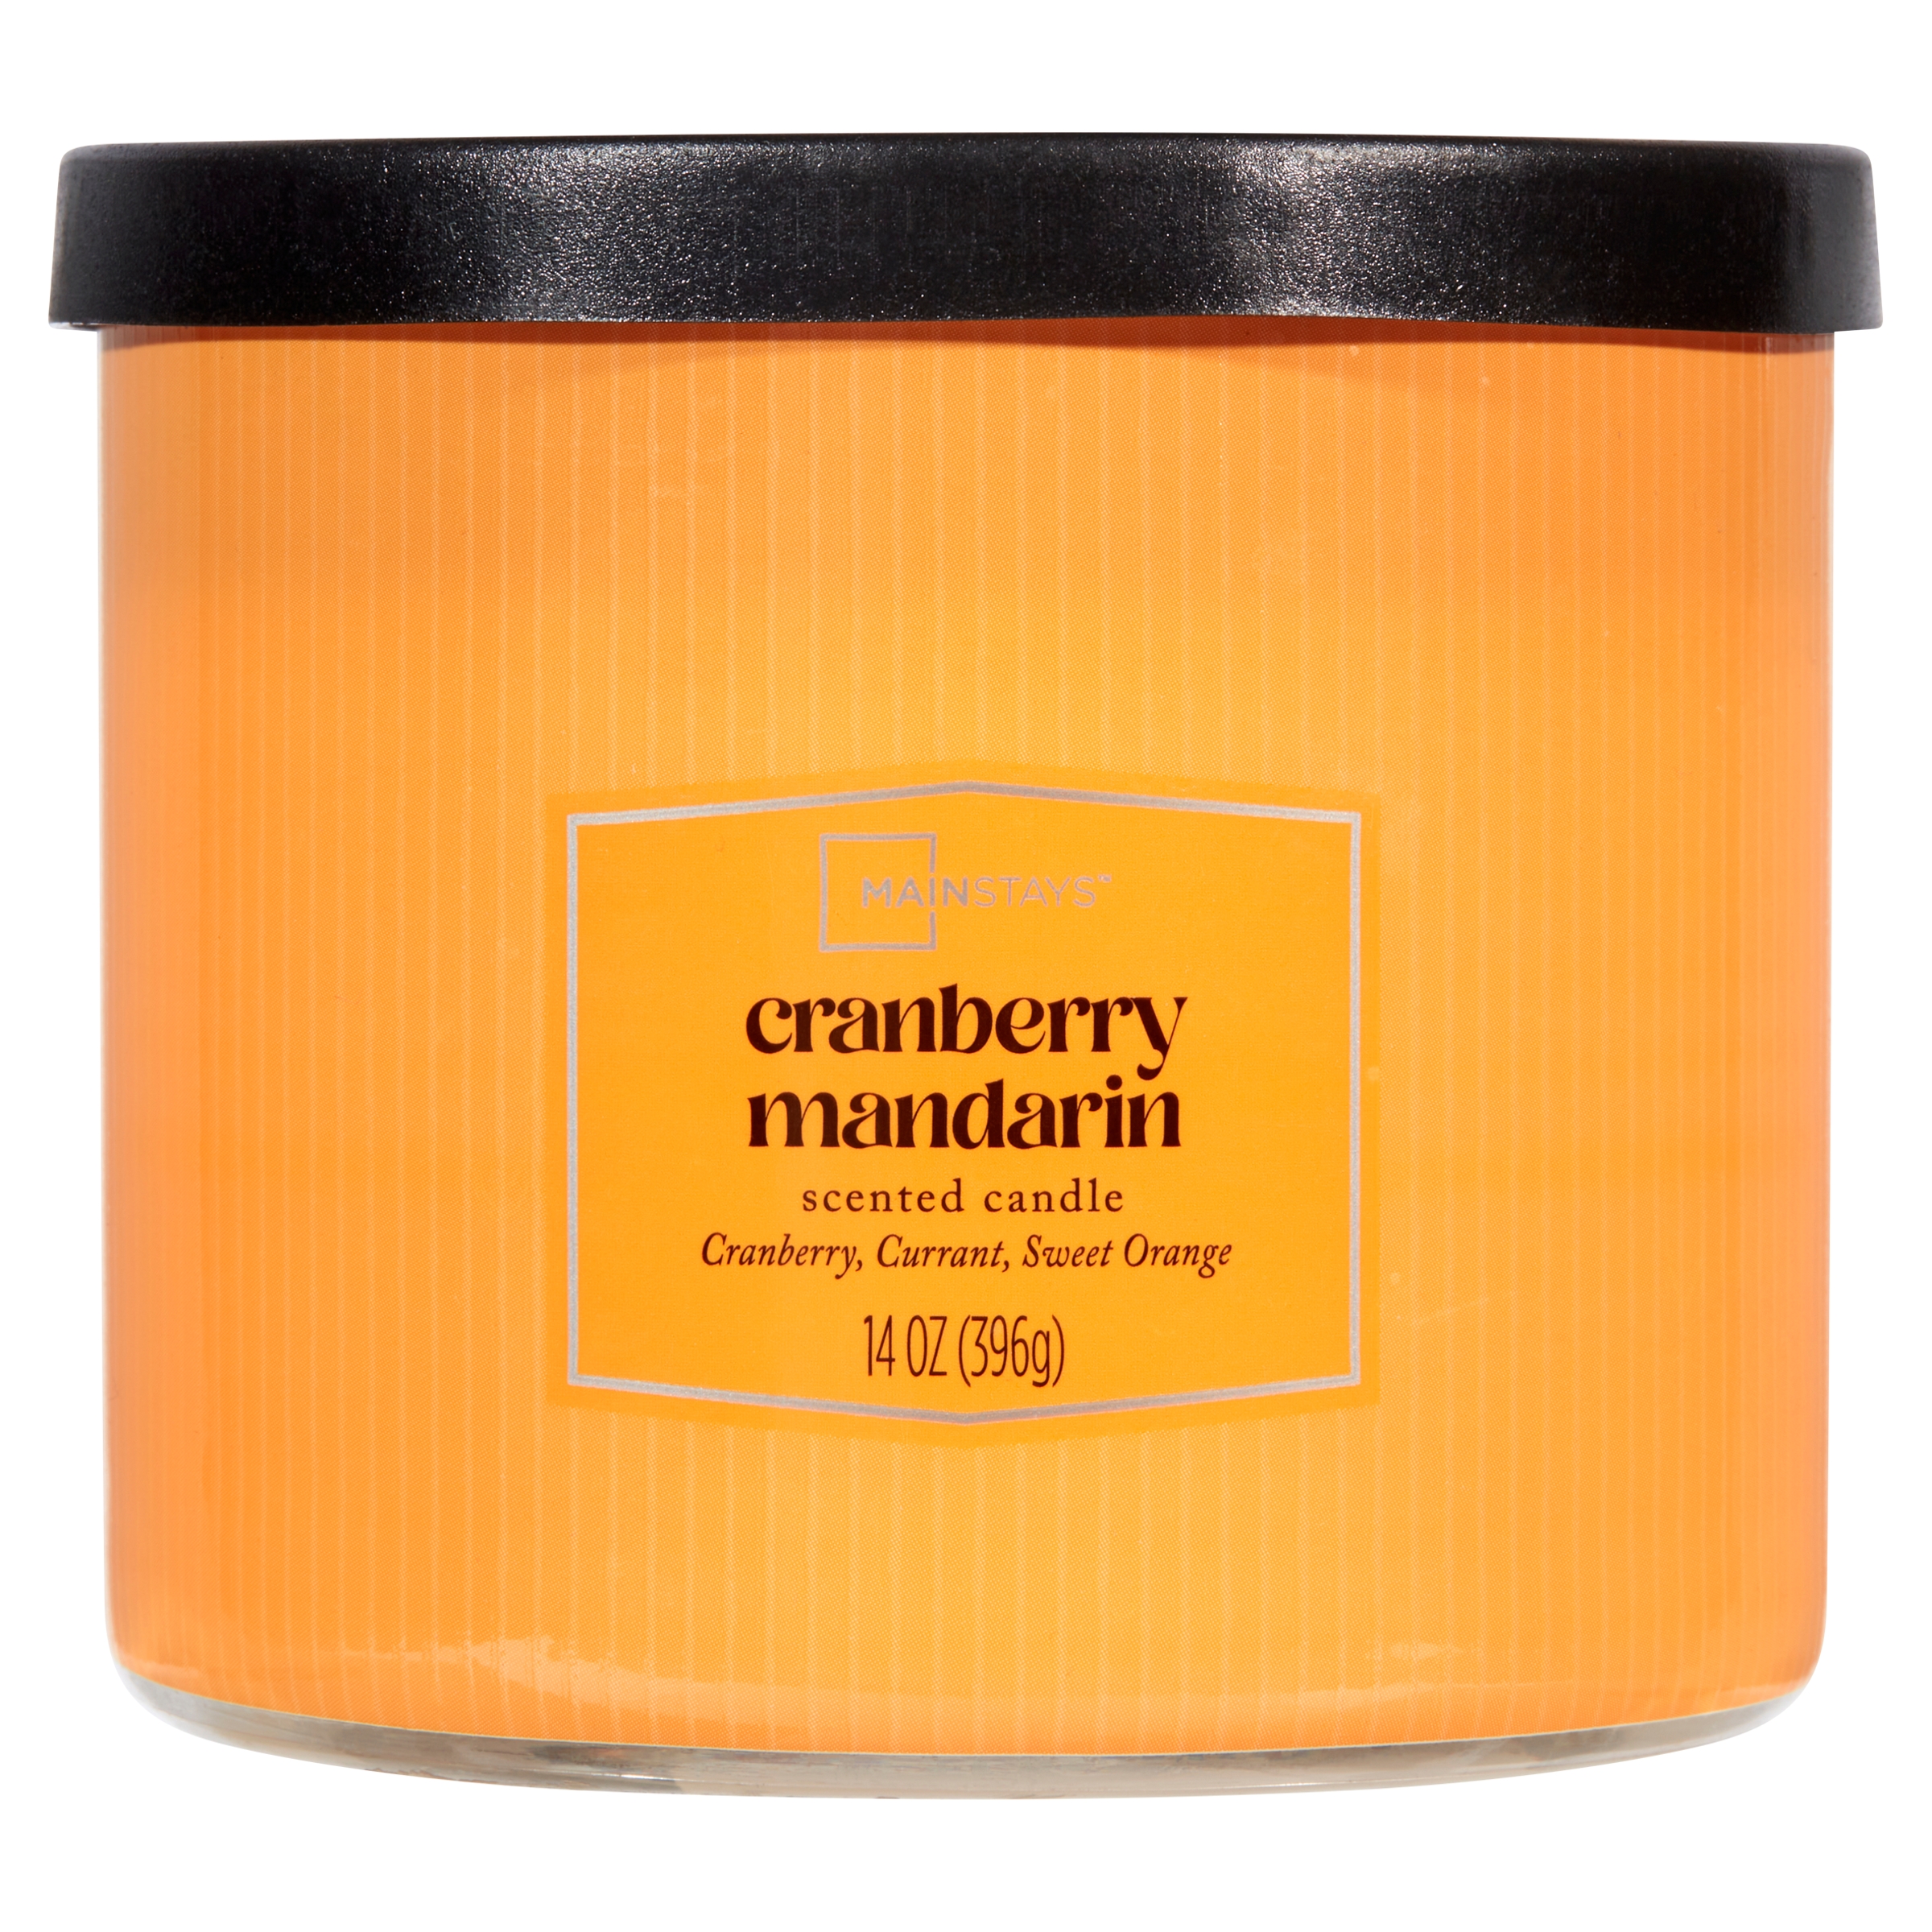 Mainstays 3-Wick Textured Wrapped Cranberry Mandarin Scented Candle, 14 oz - image 1 of 7